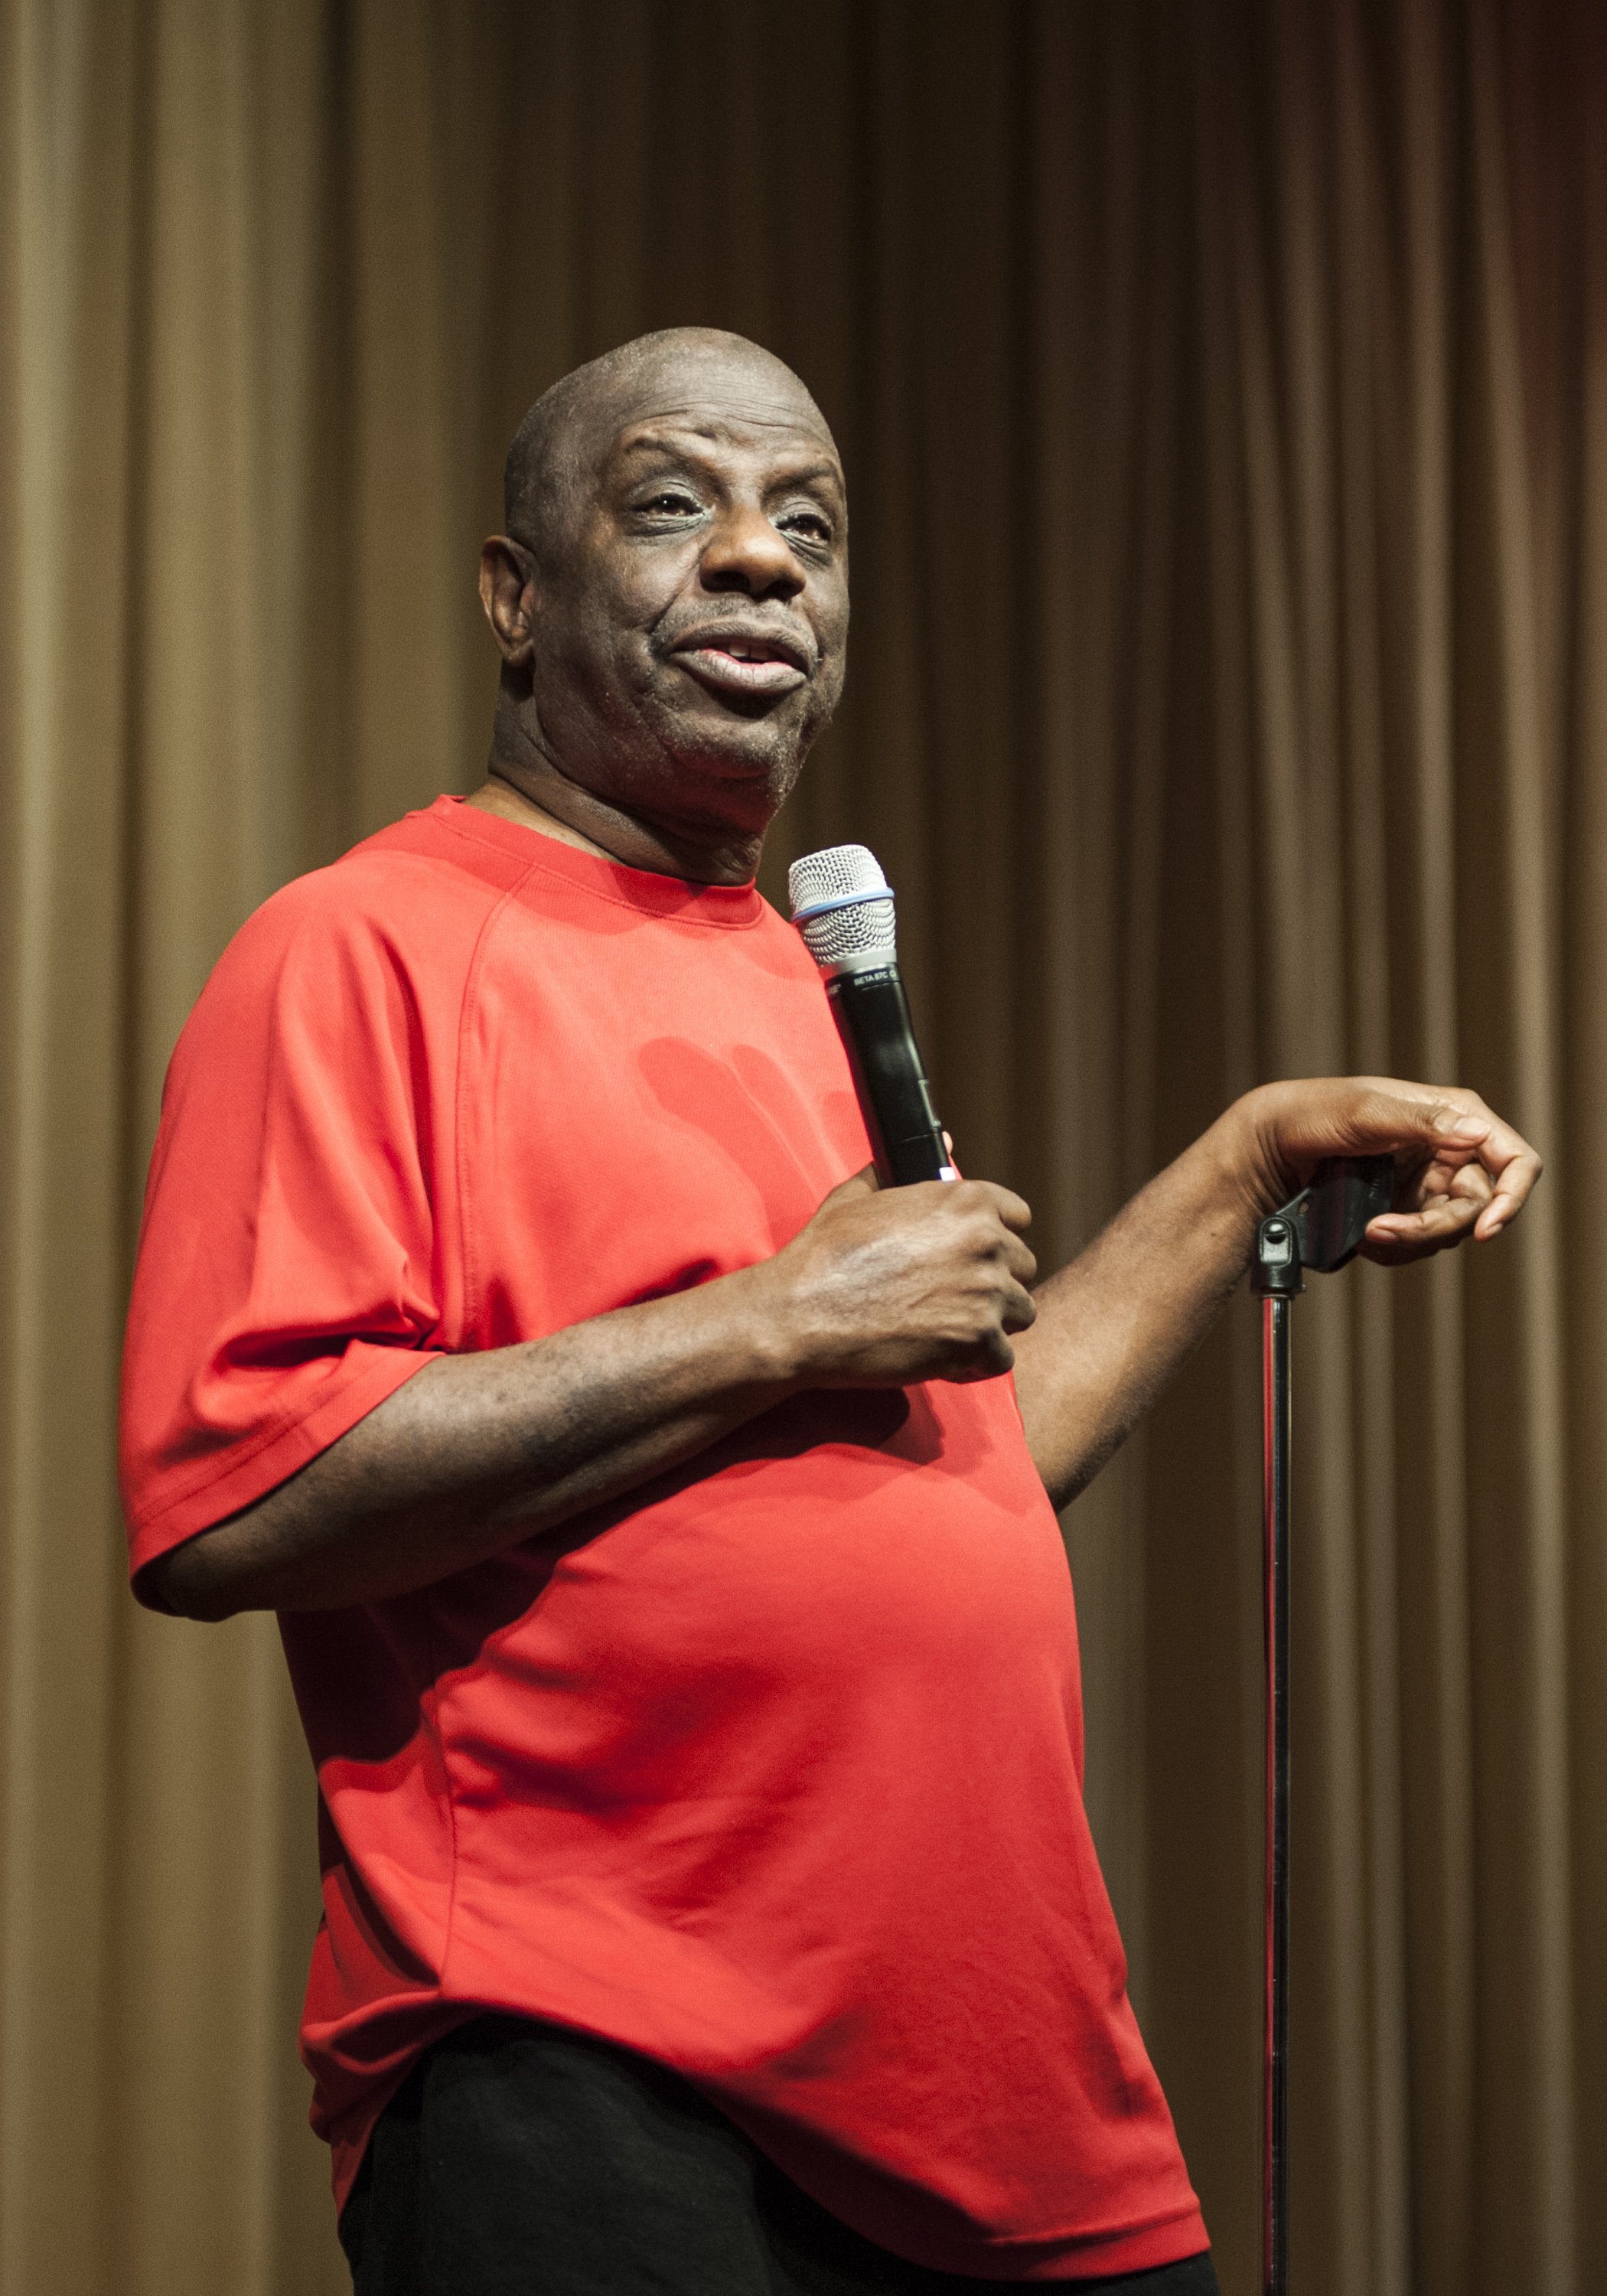 Jimmie Walker discussing his book "Dynomite! Good Times, Bad Times, Our Times - A Memoir" on May 3, 2013 in Washington, DC | Photo: Getty Images